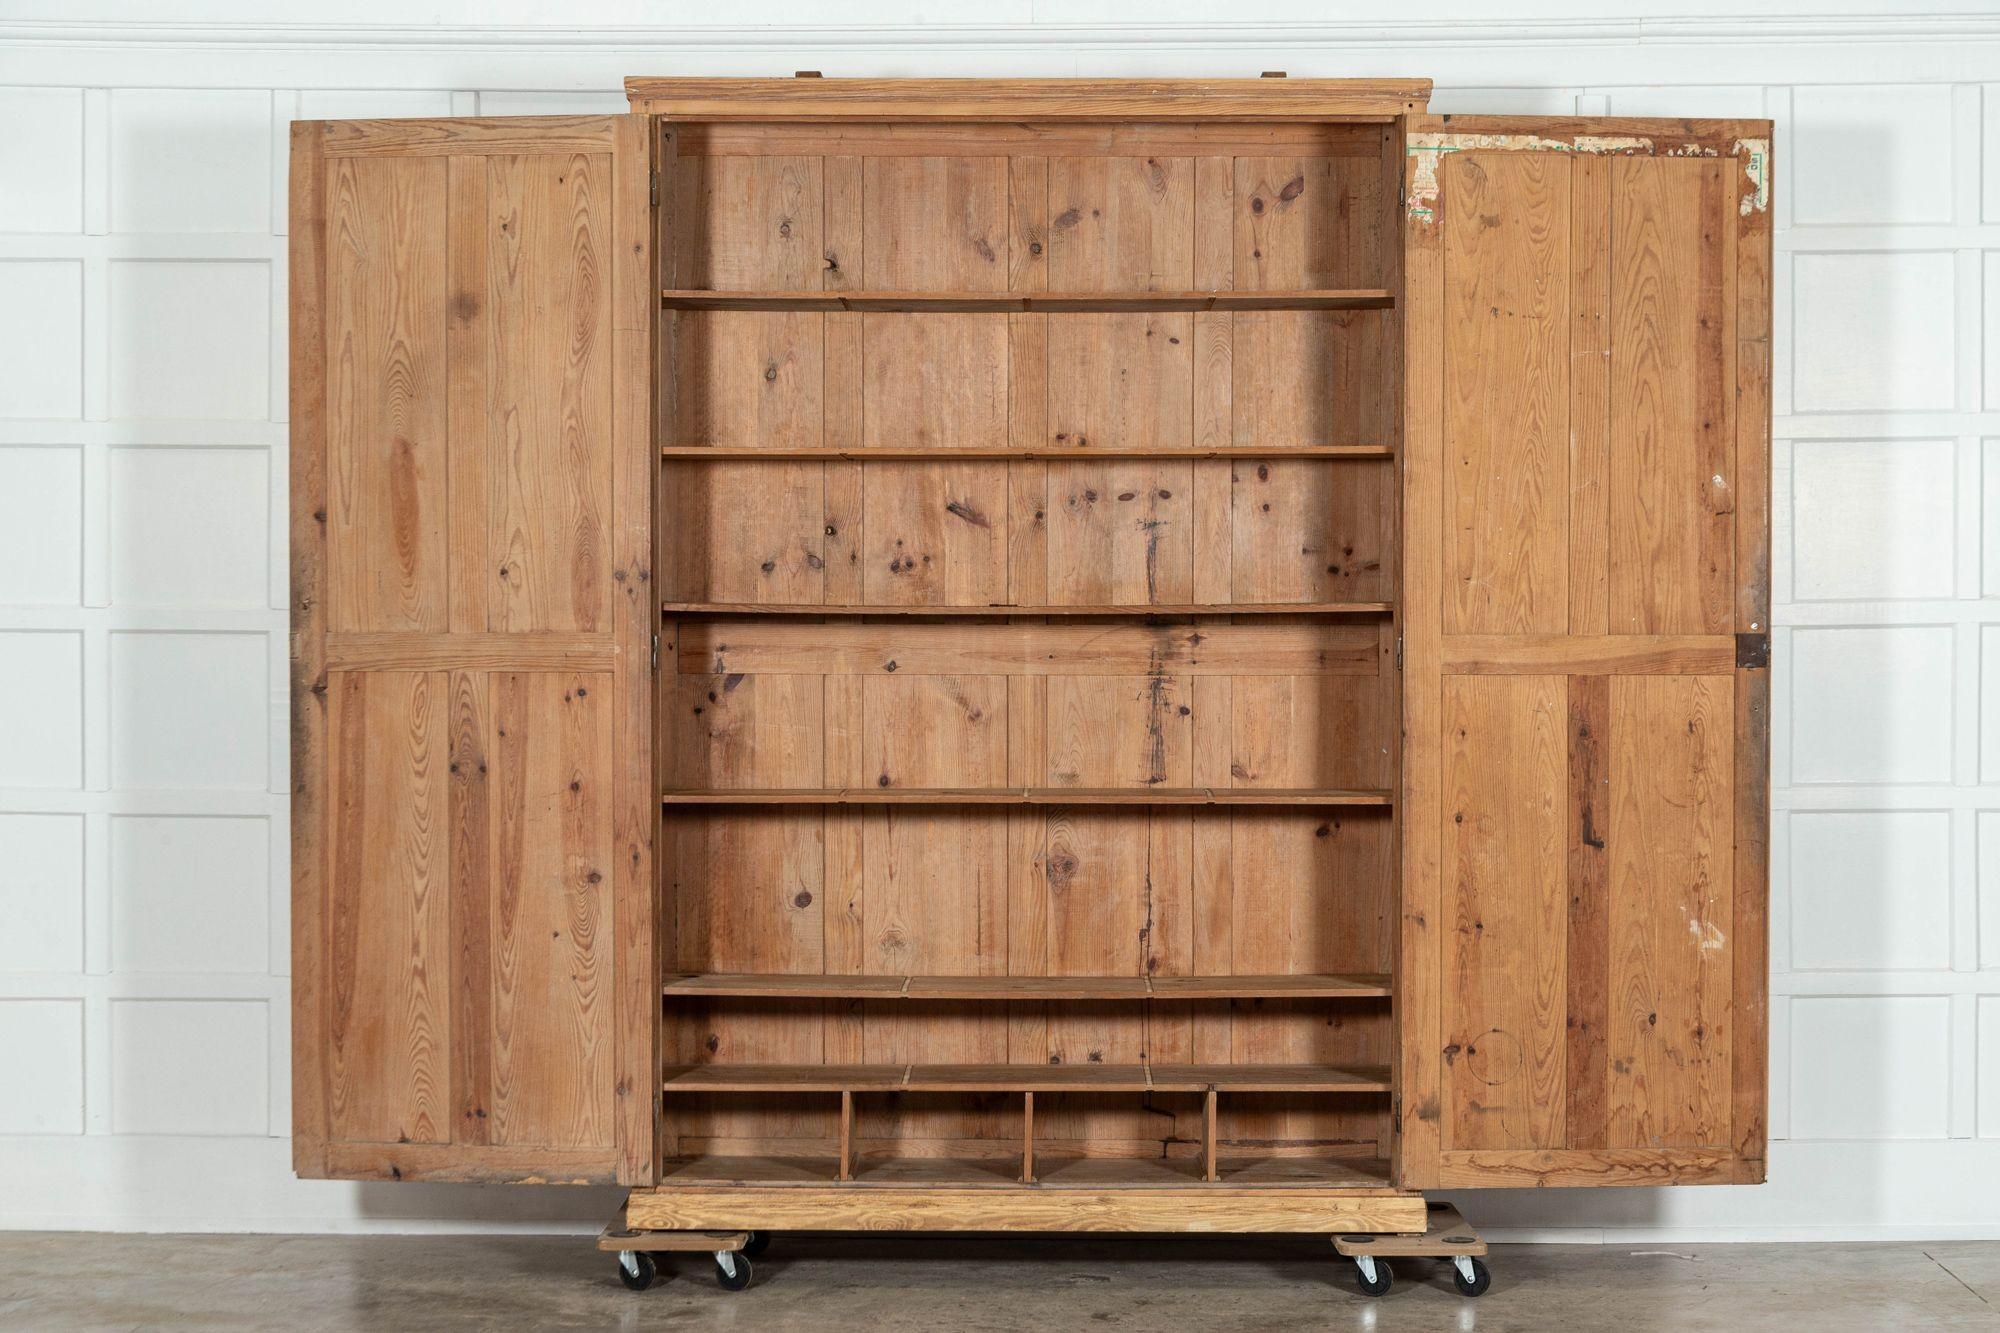 Circa 1880.

19thc French lime washed panelled cupboard

Kitchen, Bedroom, Hall or Boot room


Sourced from the South of France

Measures: W162 x D40 x H233cm.